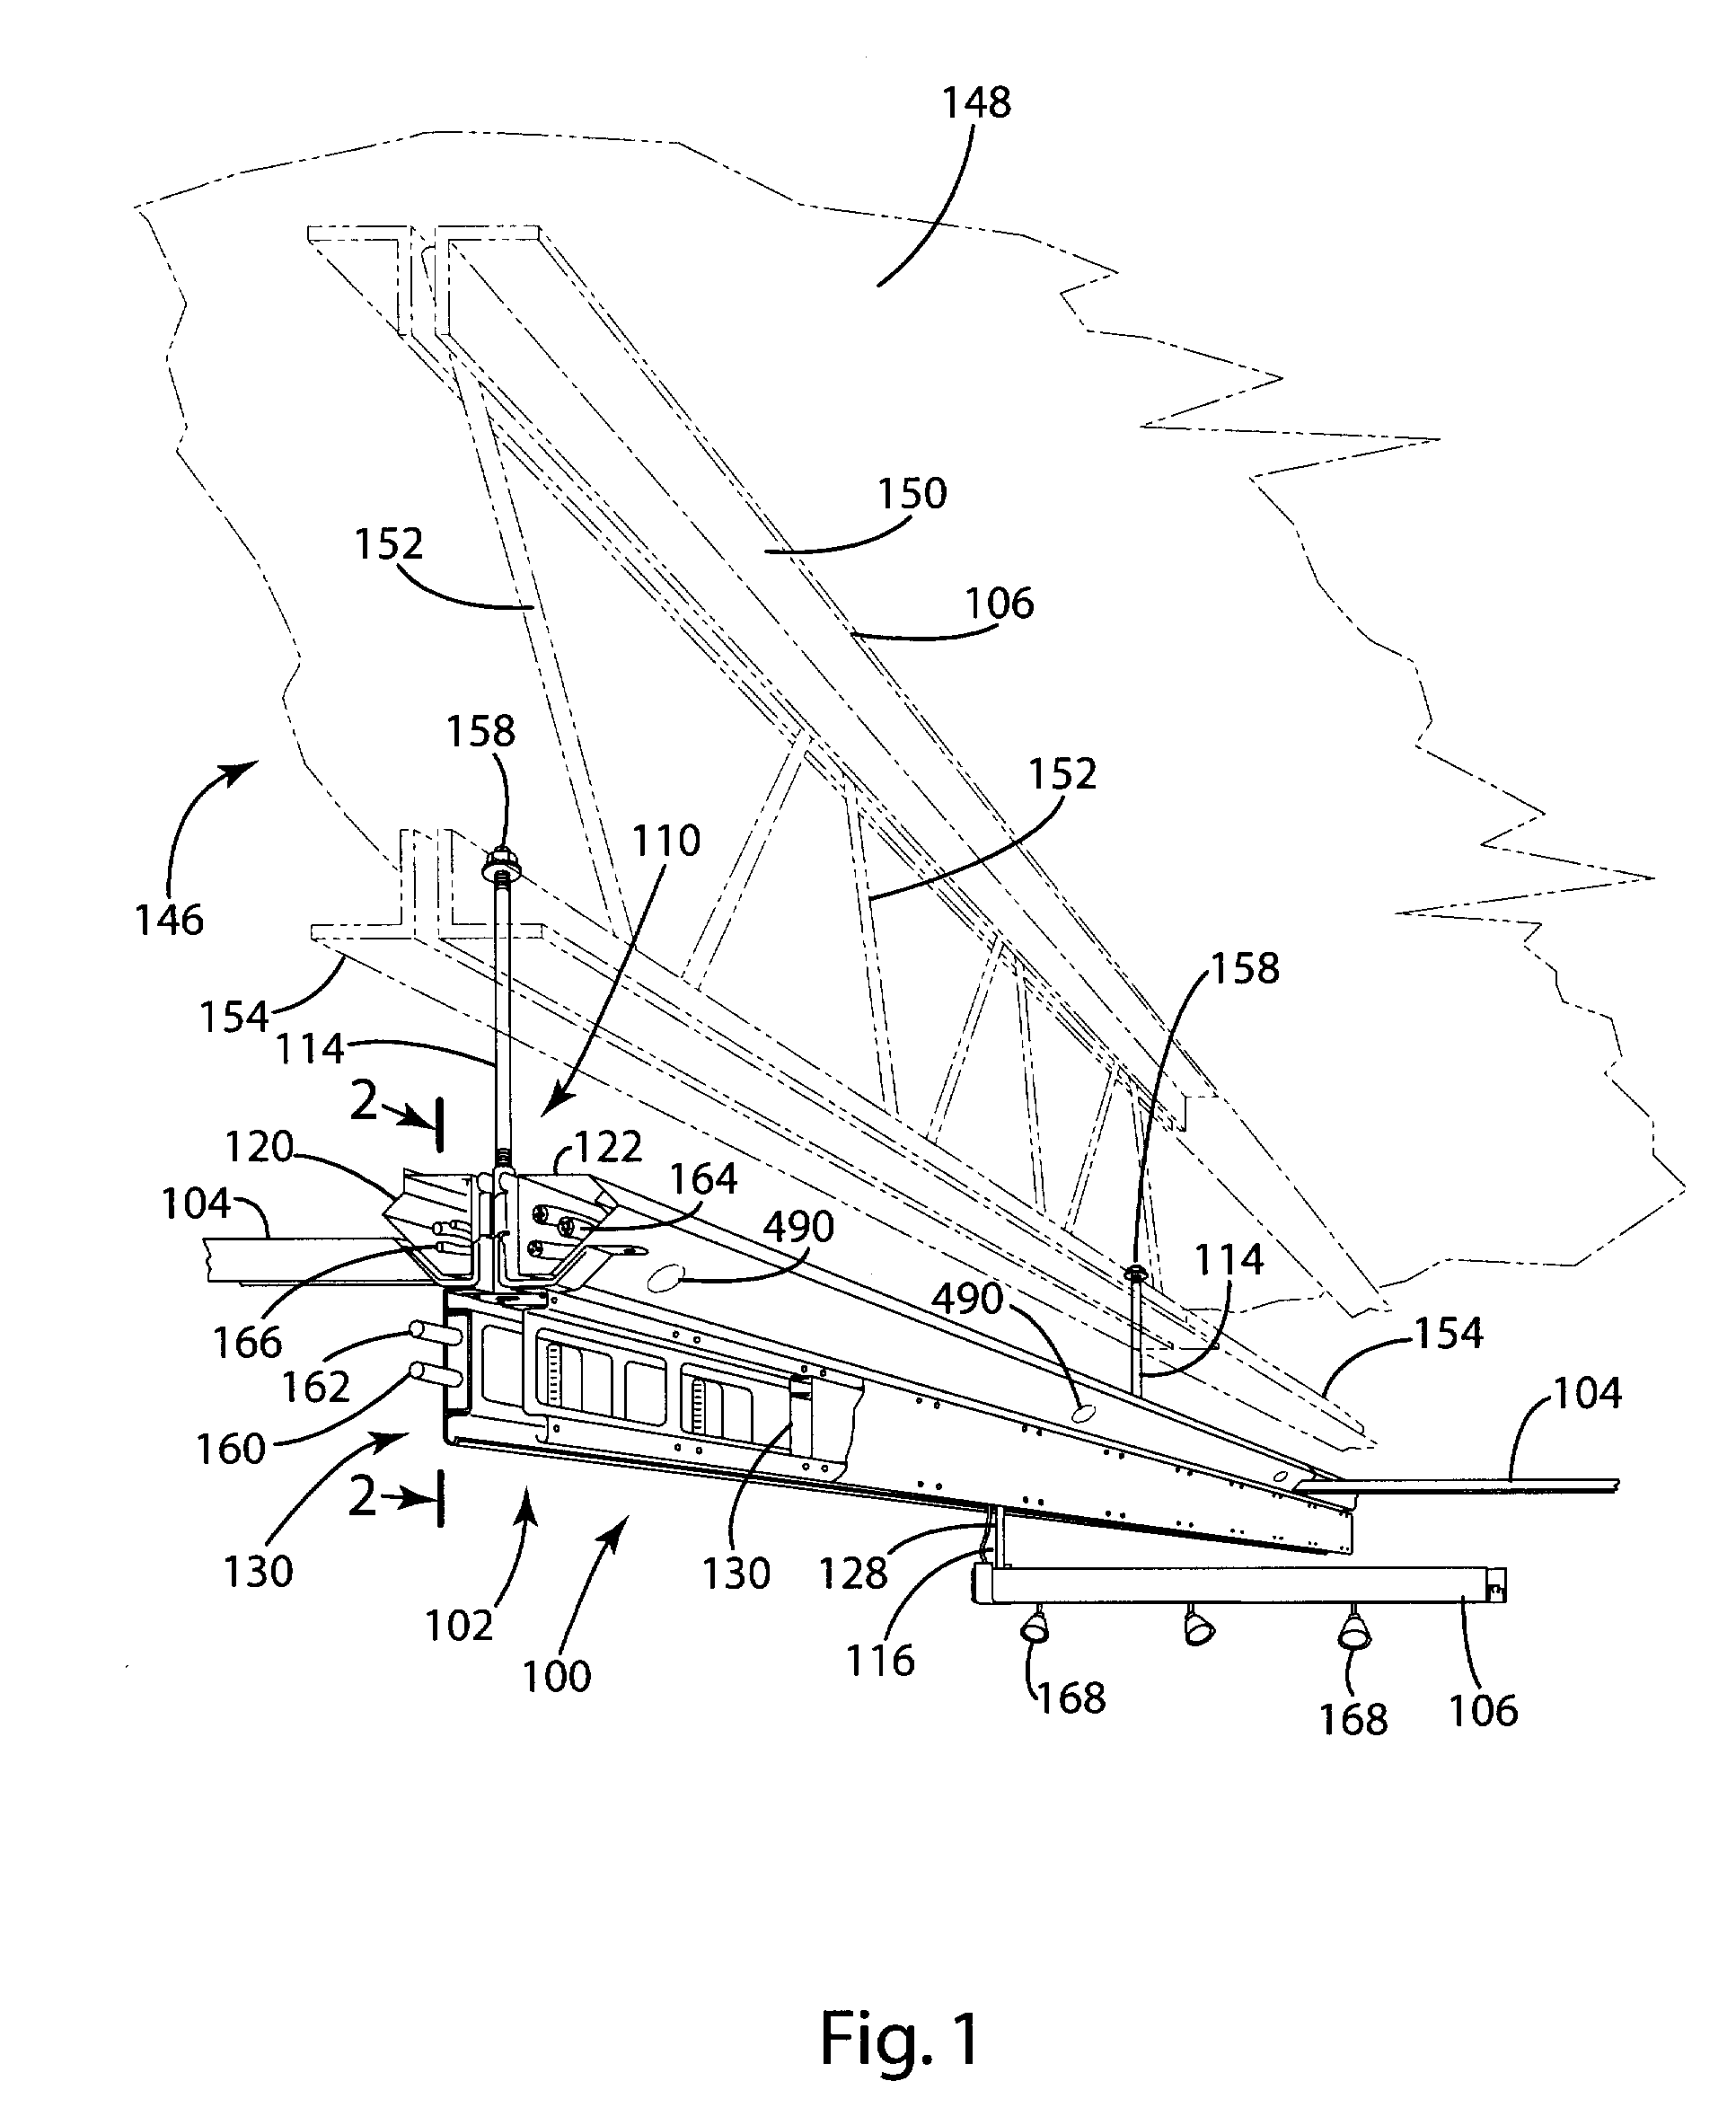 Modules for interconnection of sensors, actuators and application devices